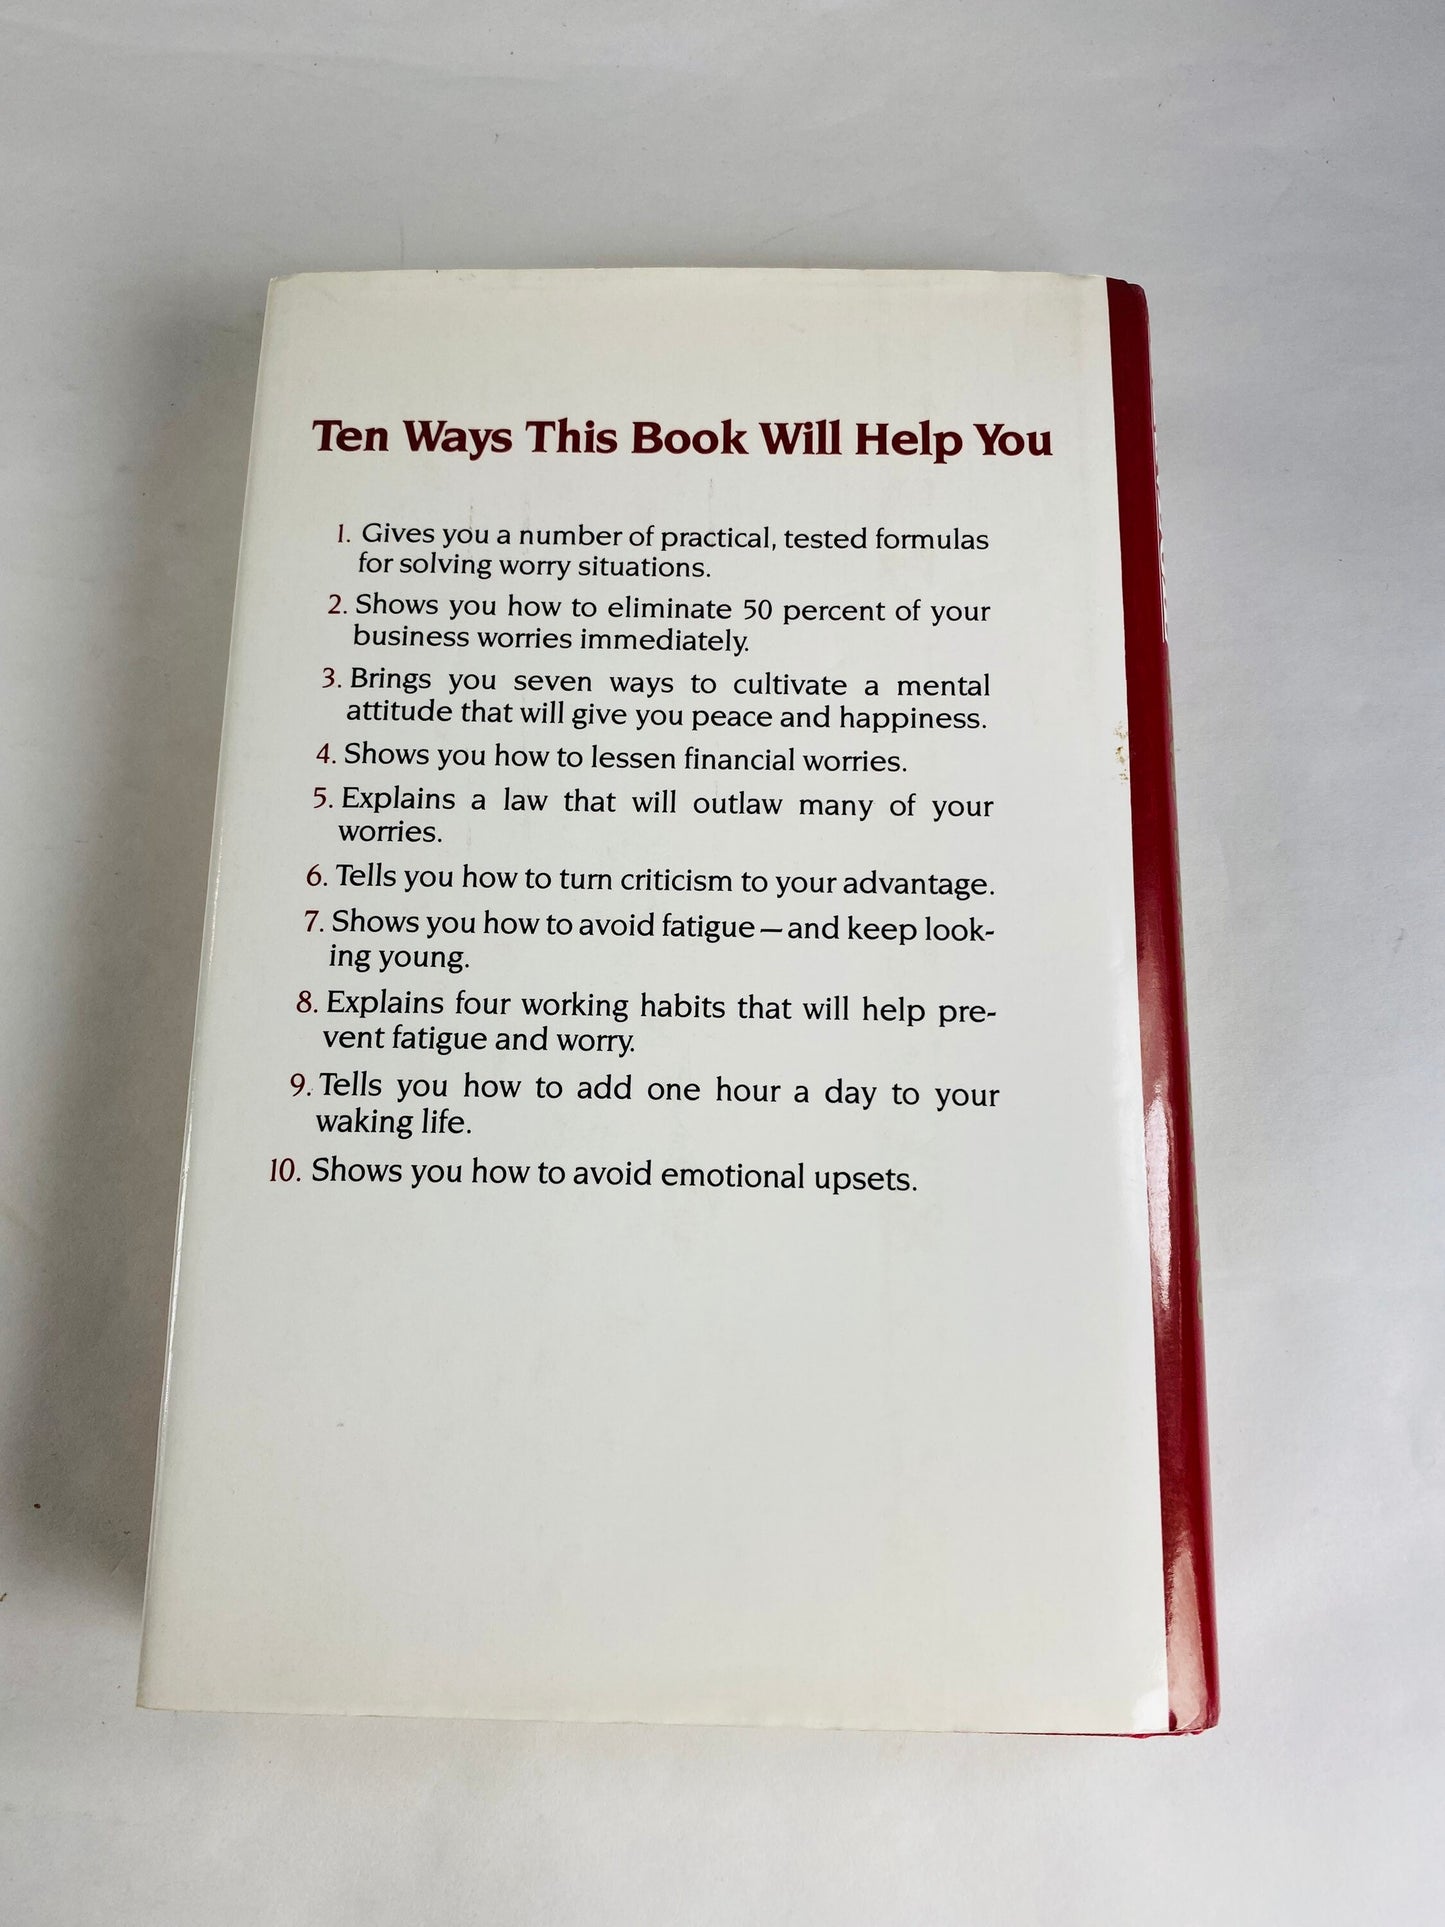 Dale Carnegie How to Stop Worrying and Start Living vintage book circa 1983 Self-Help Mindfulness self care